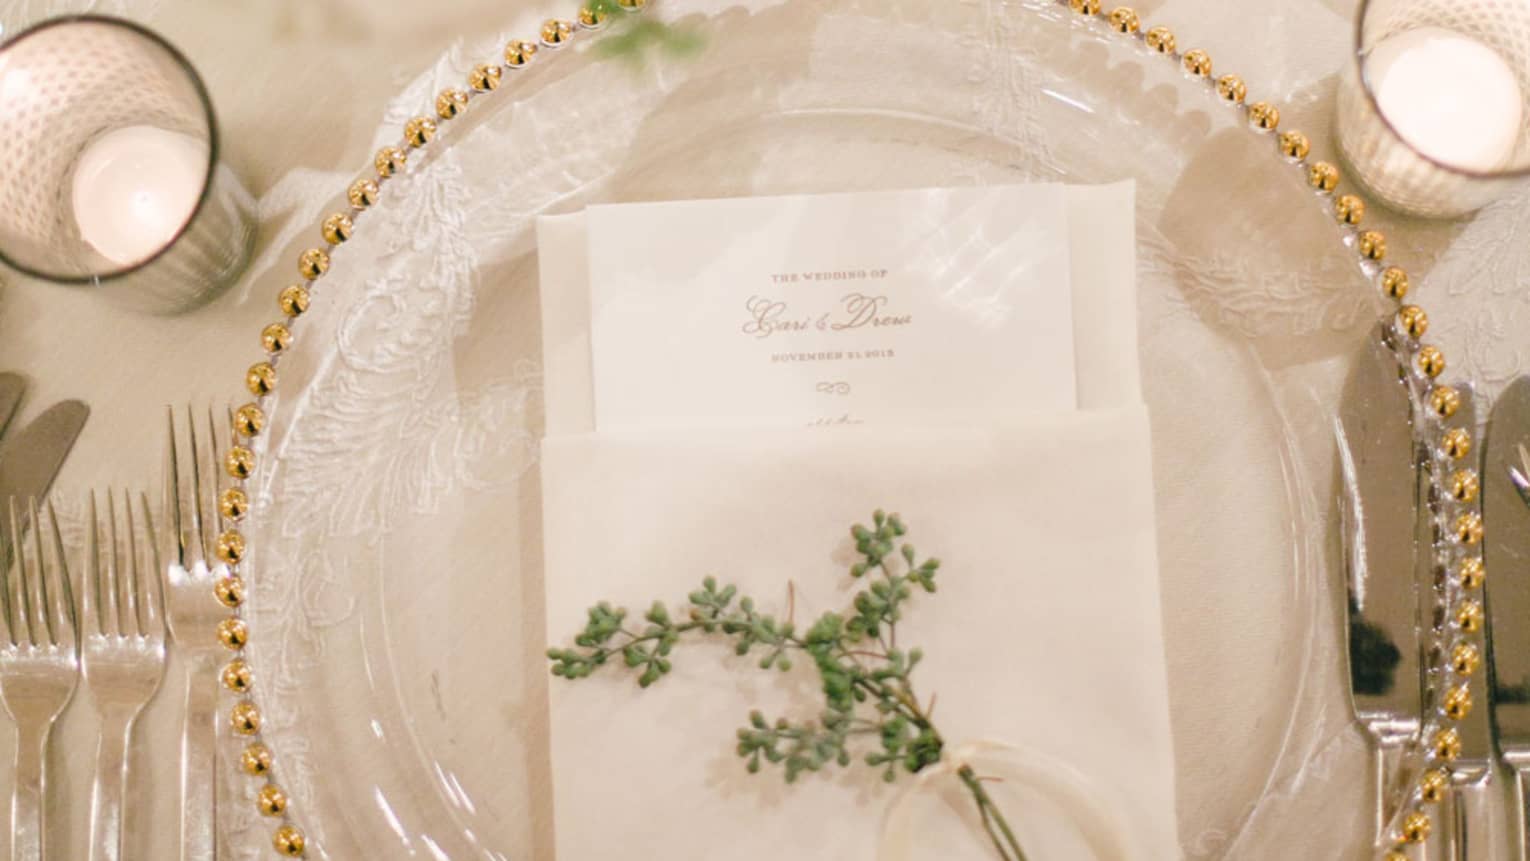 Wedding table setting with menu and flower on plate